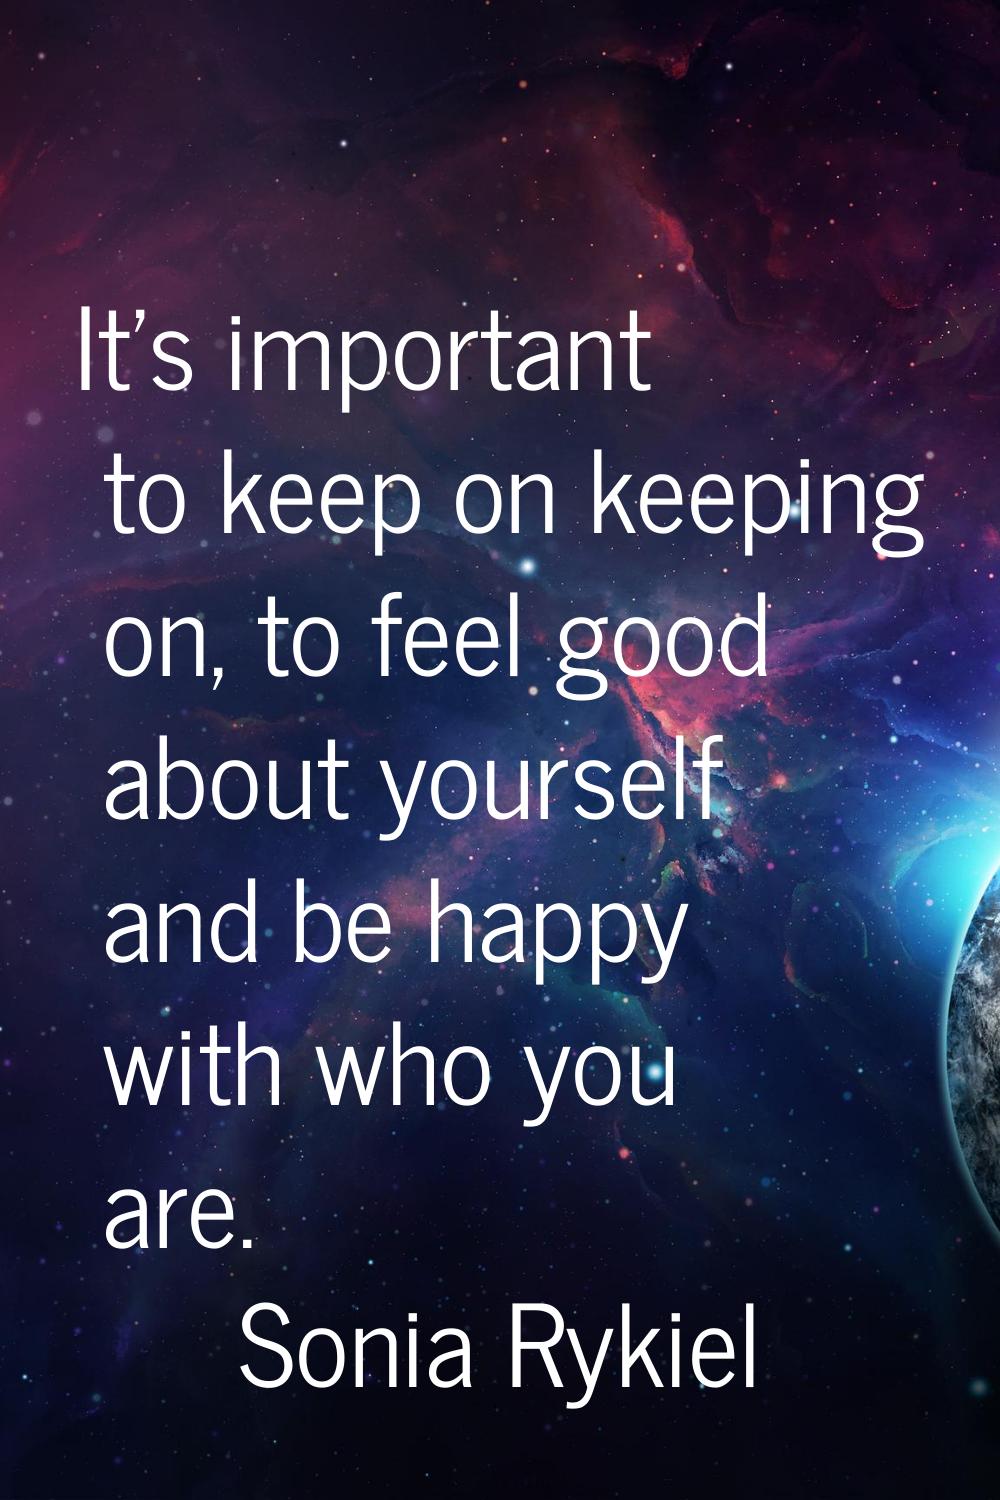 It's important to keep on keeping on, to feel good about yourself and be happy with who you are.